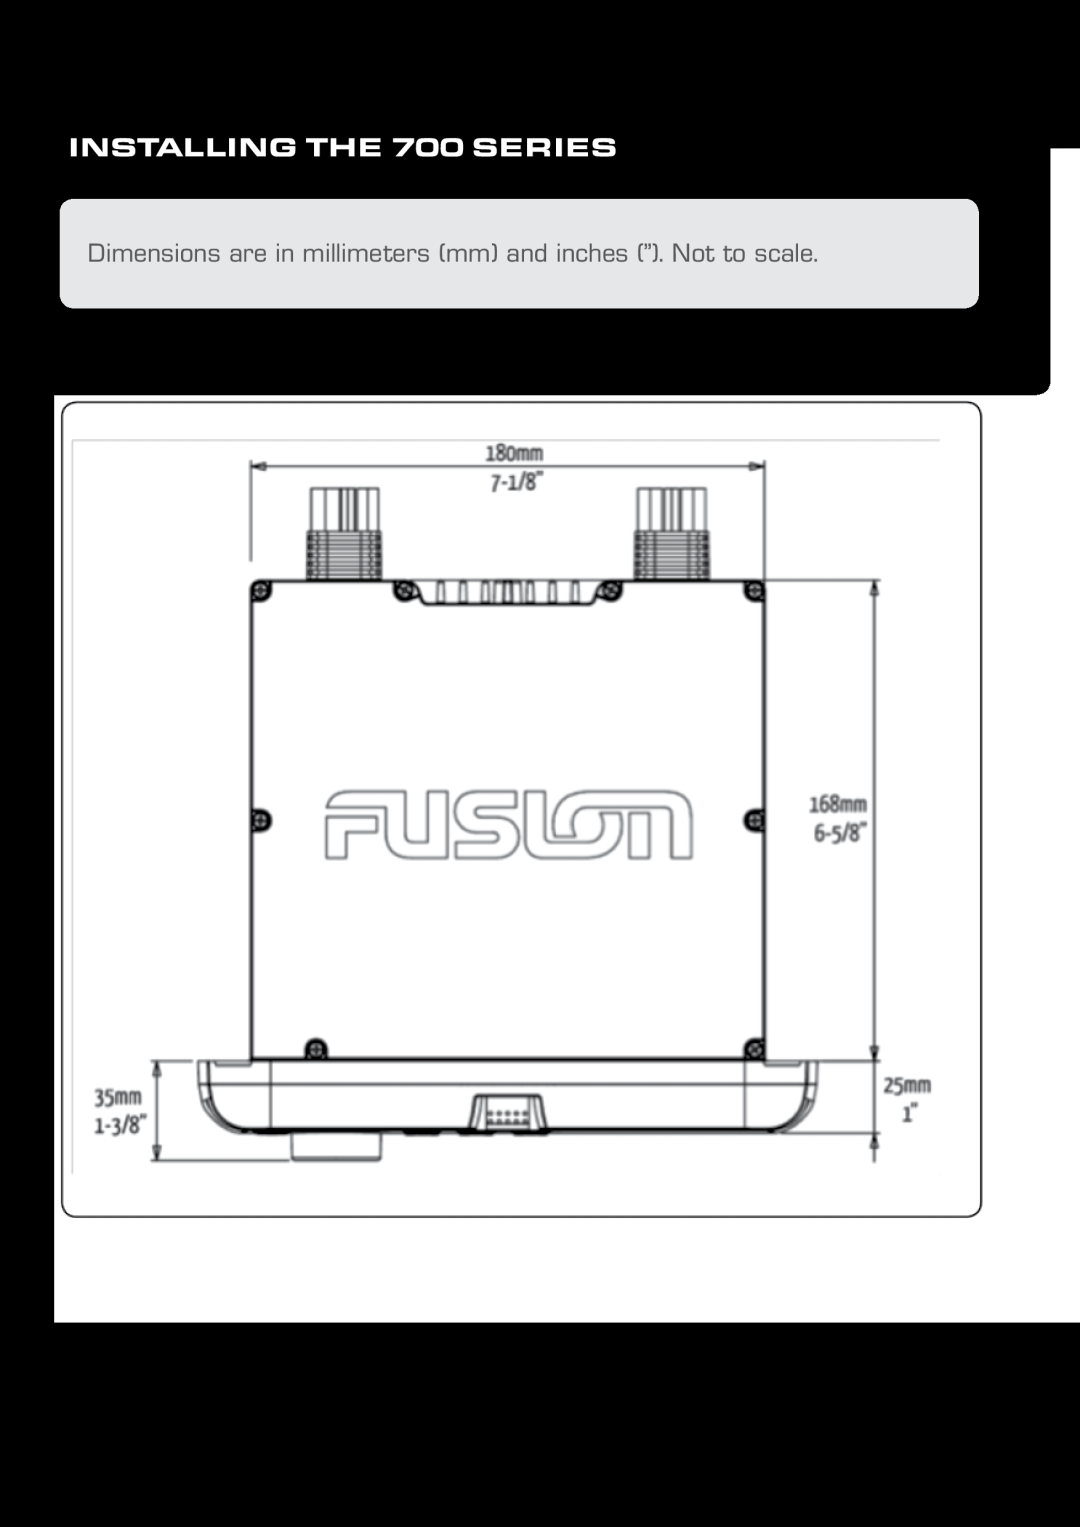 Fusion MS-IP700 manual INSTALLING THE 700 SERIES, Dimensions are in millimeters mm and inches ”. Not to scale 